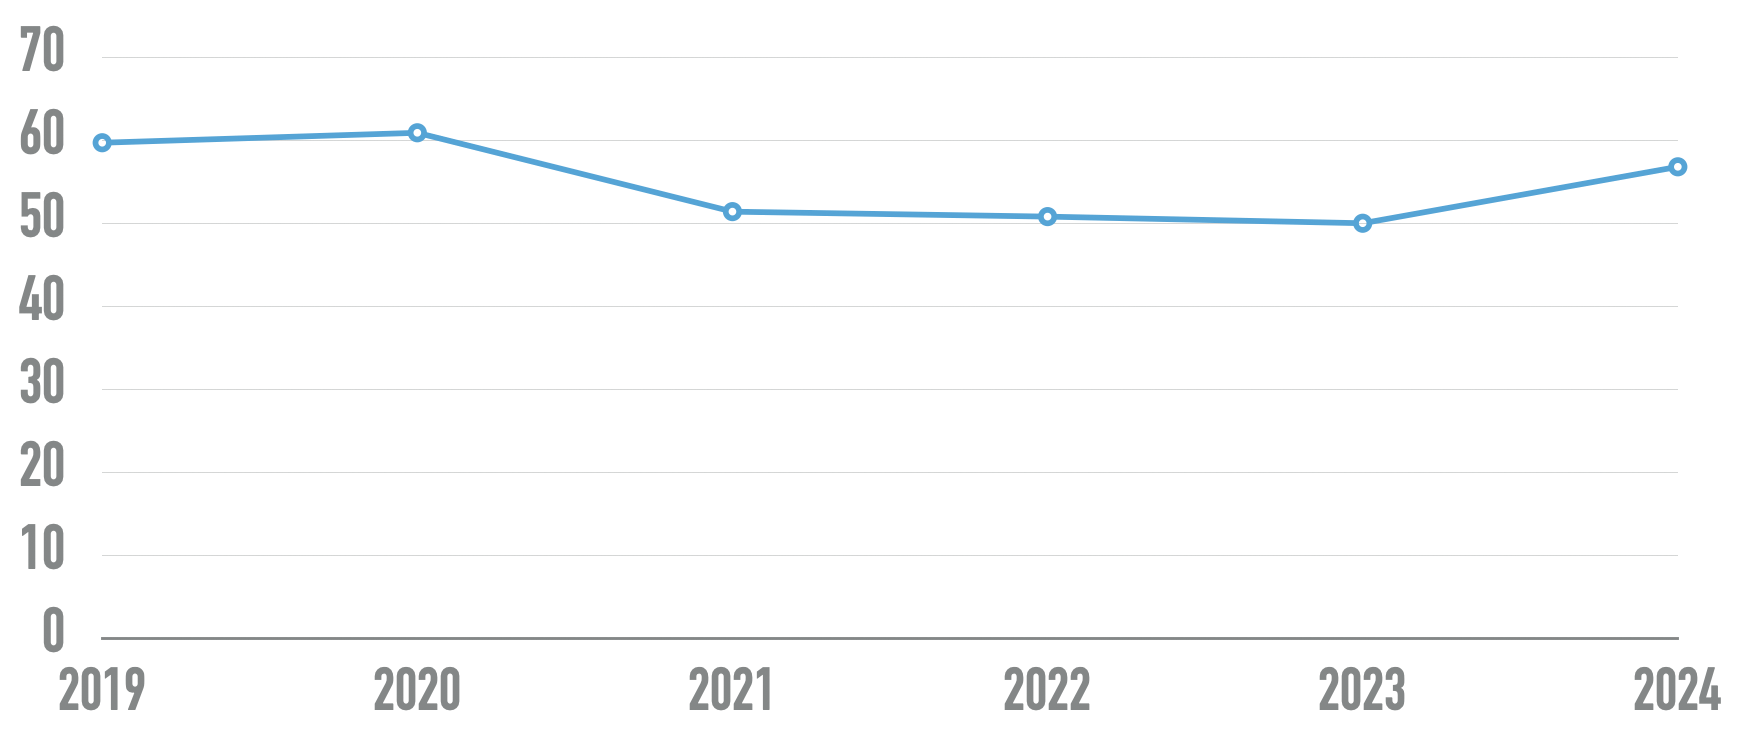 Line chart showing average errors of around 60 in 2019 and 2020 decreasing to around 50 in 2021, 2022, and 2023, then increasing to 56.8 in 2024.